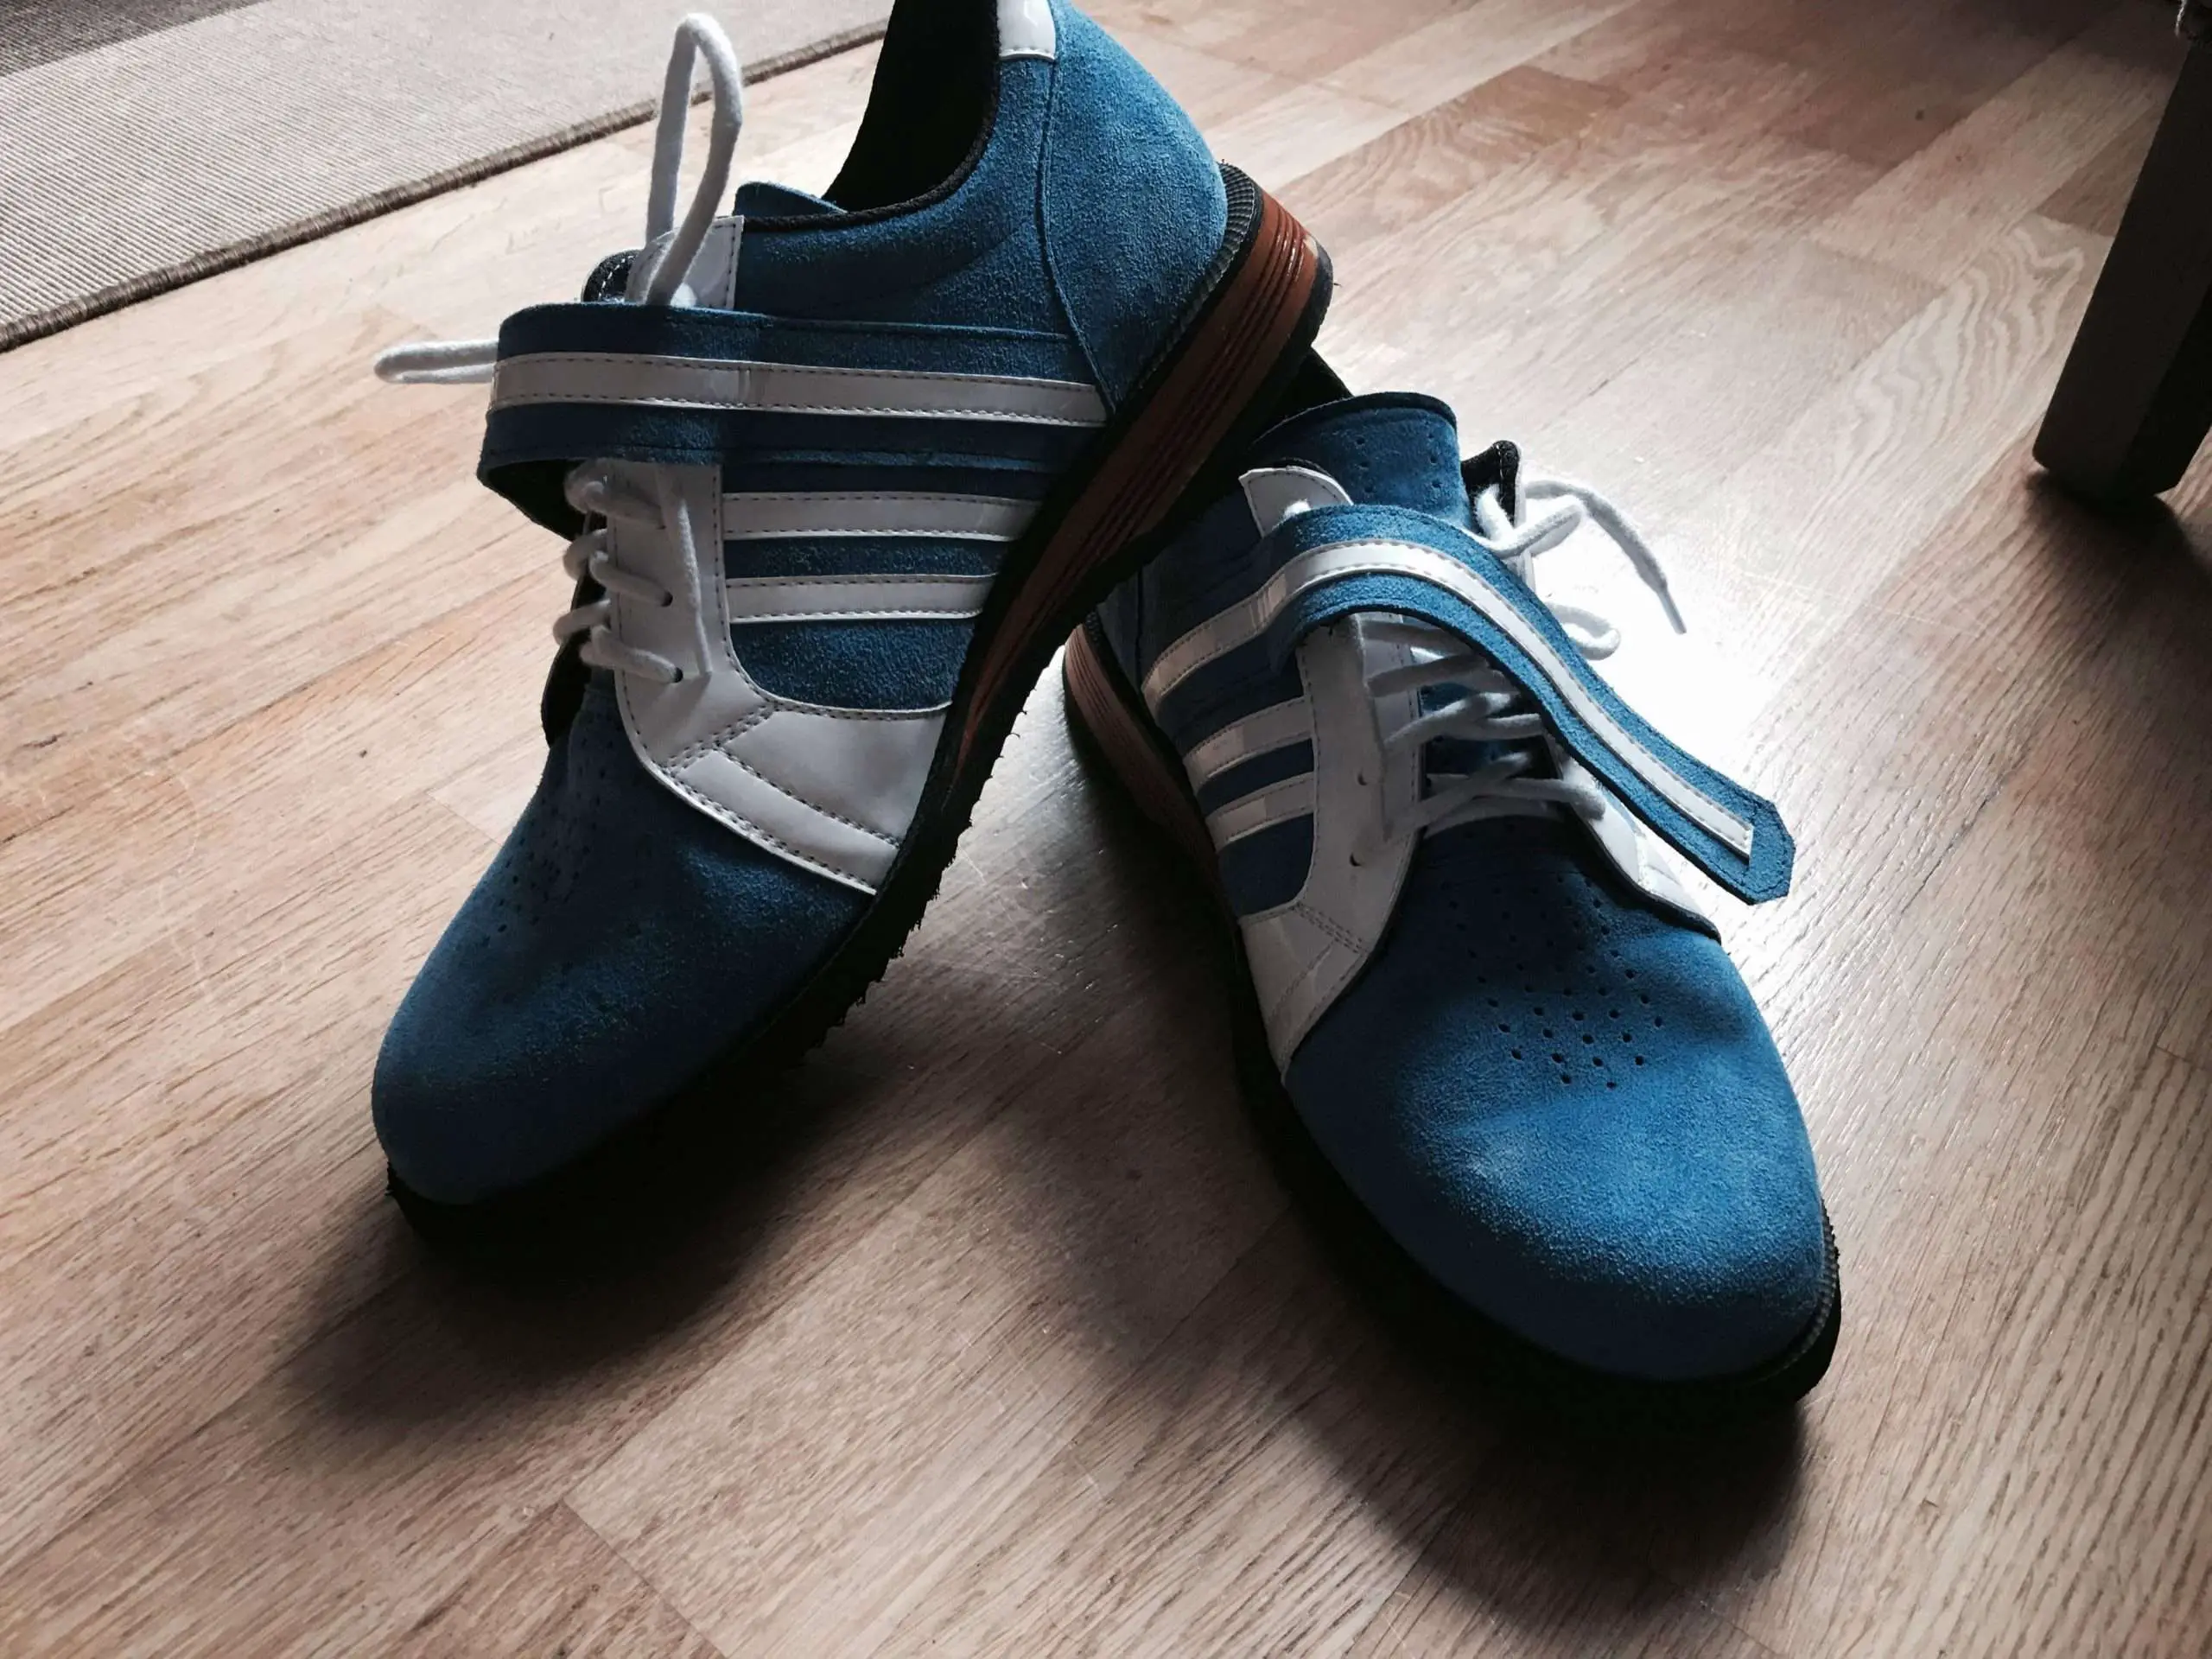 Just my new shoes, i can recommend them! : weightlifting